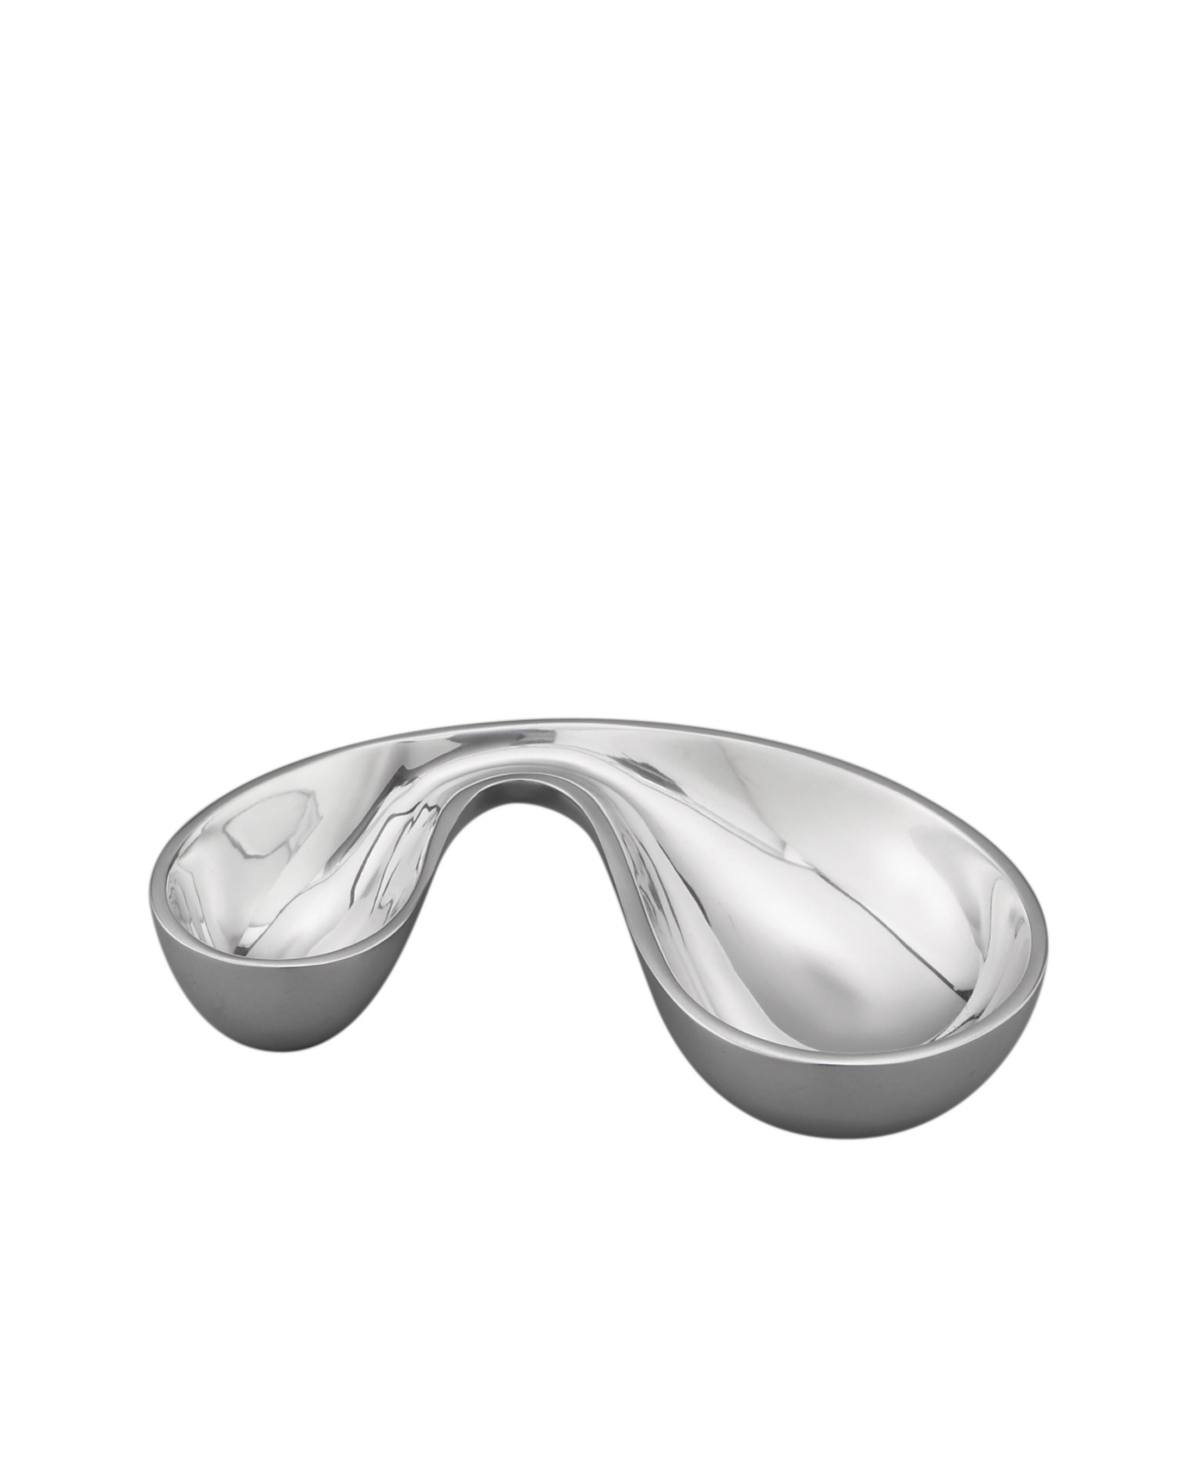 Shop Nambe Alloy Morphik Olive Bowl, 8.75" X 4.5" In Silver